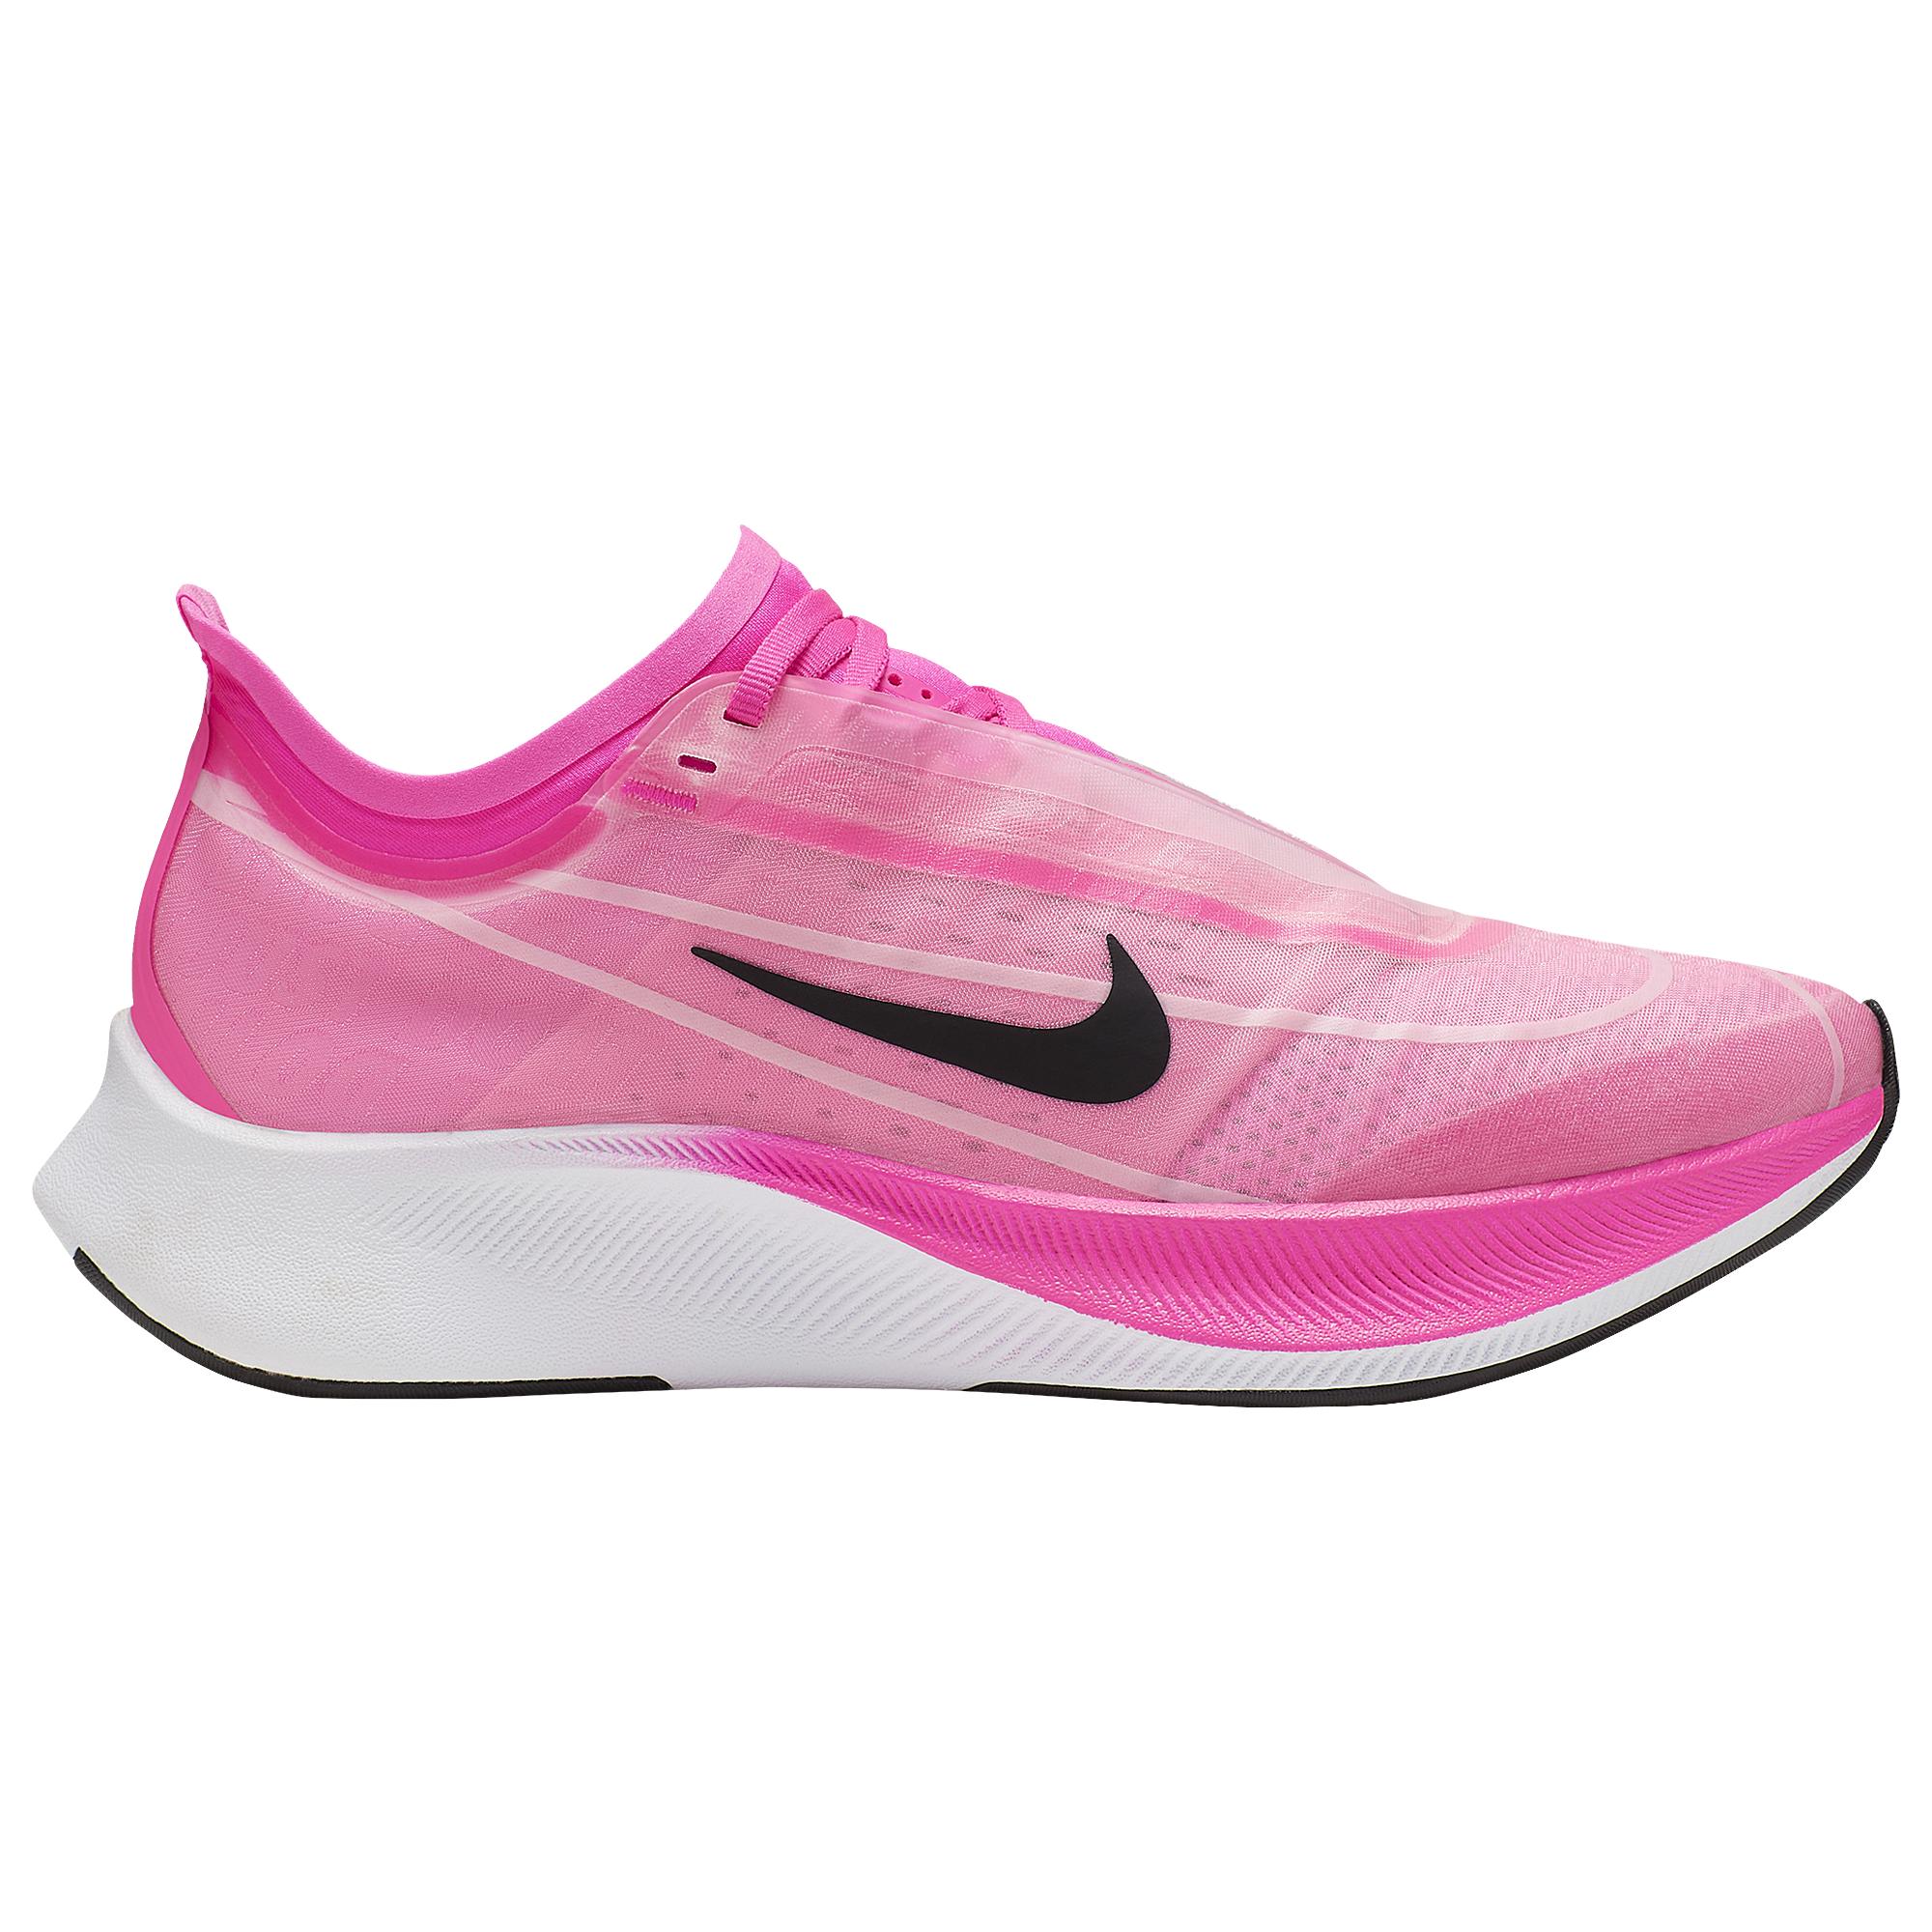 Nike Zoom Fly 3 Running Shoe in Pink 